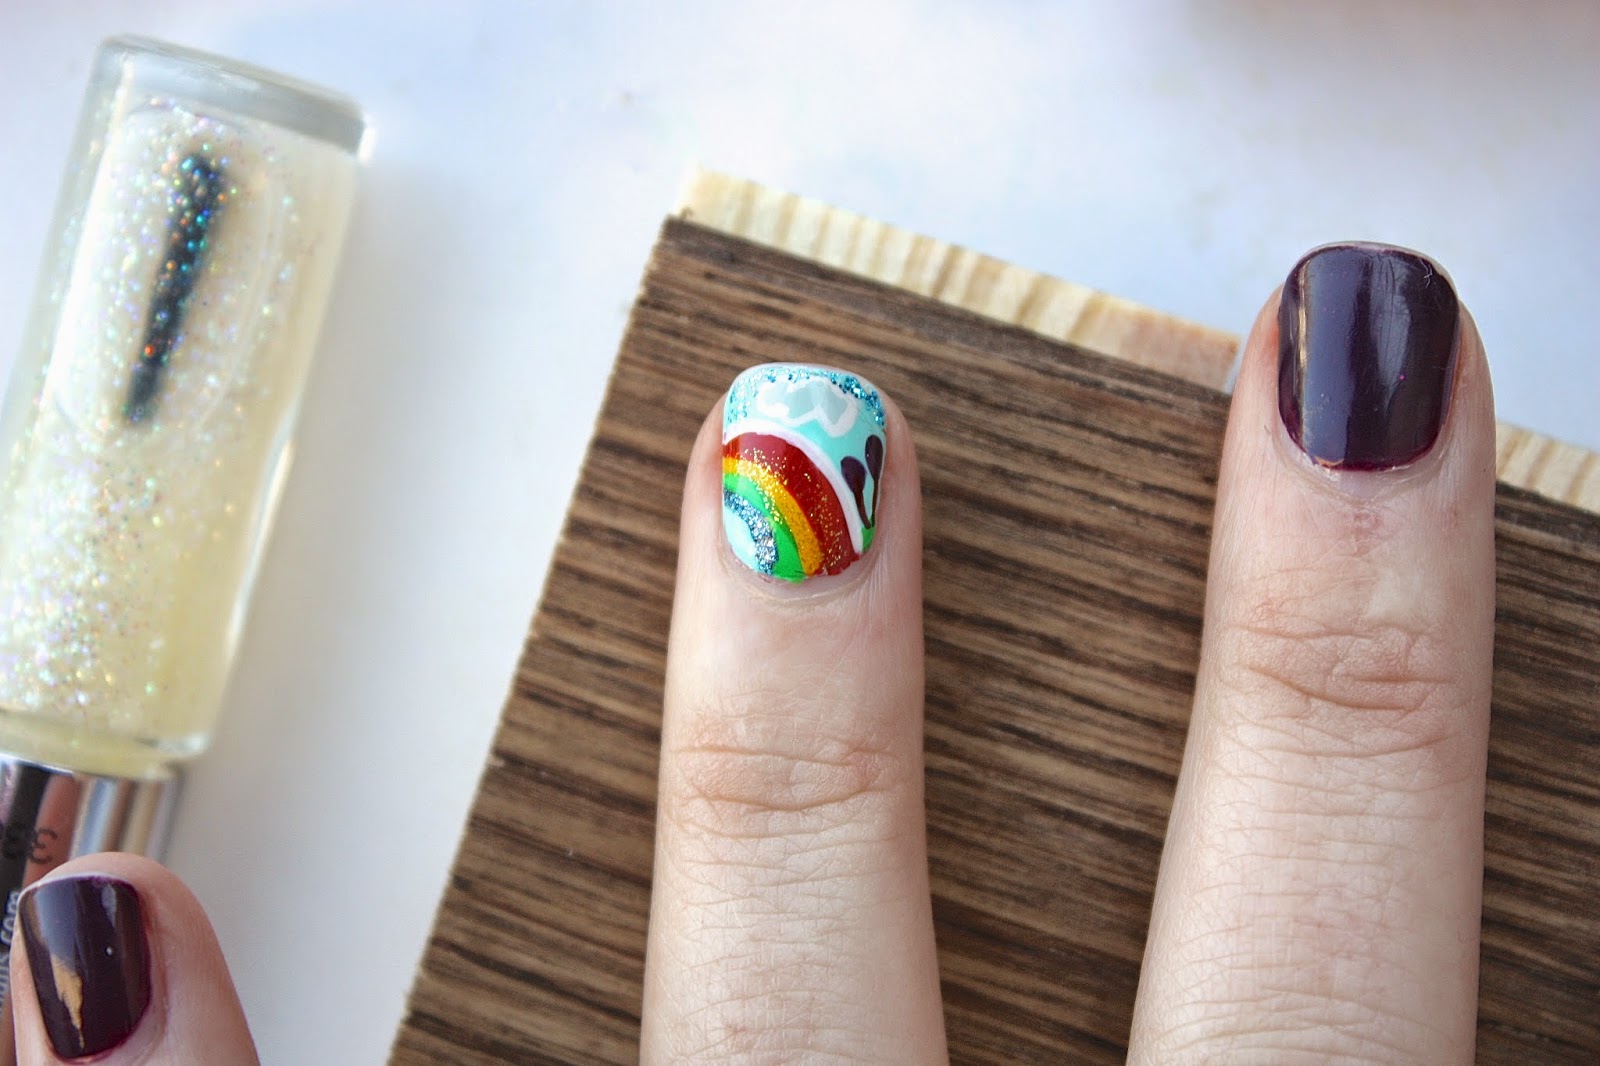 7. Nail Art Tips and Tricks on Pinterest - wide 7